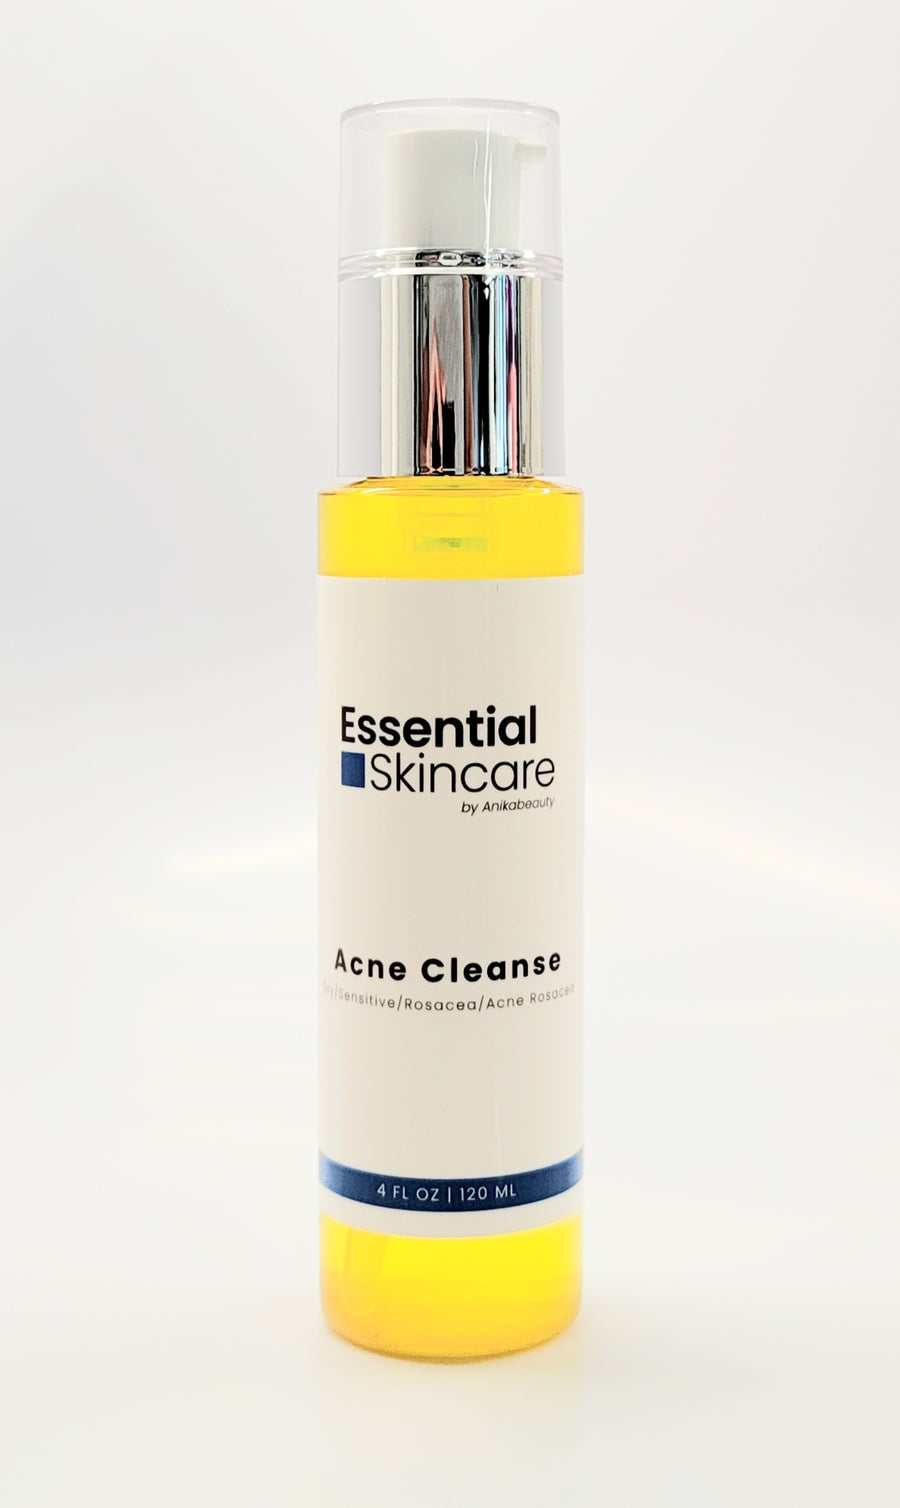 Acne Cleanse is a powerful acne cleanser that is gentle enough for dry and sensitive skin types. It is also recommended for rosacea and acne rosacea and has effective bacterial control for P-acnes and more. 